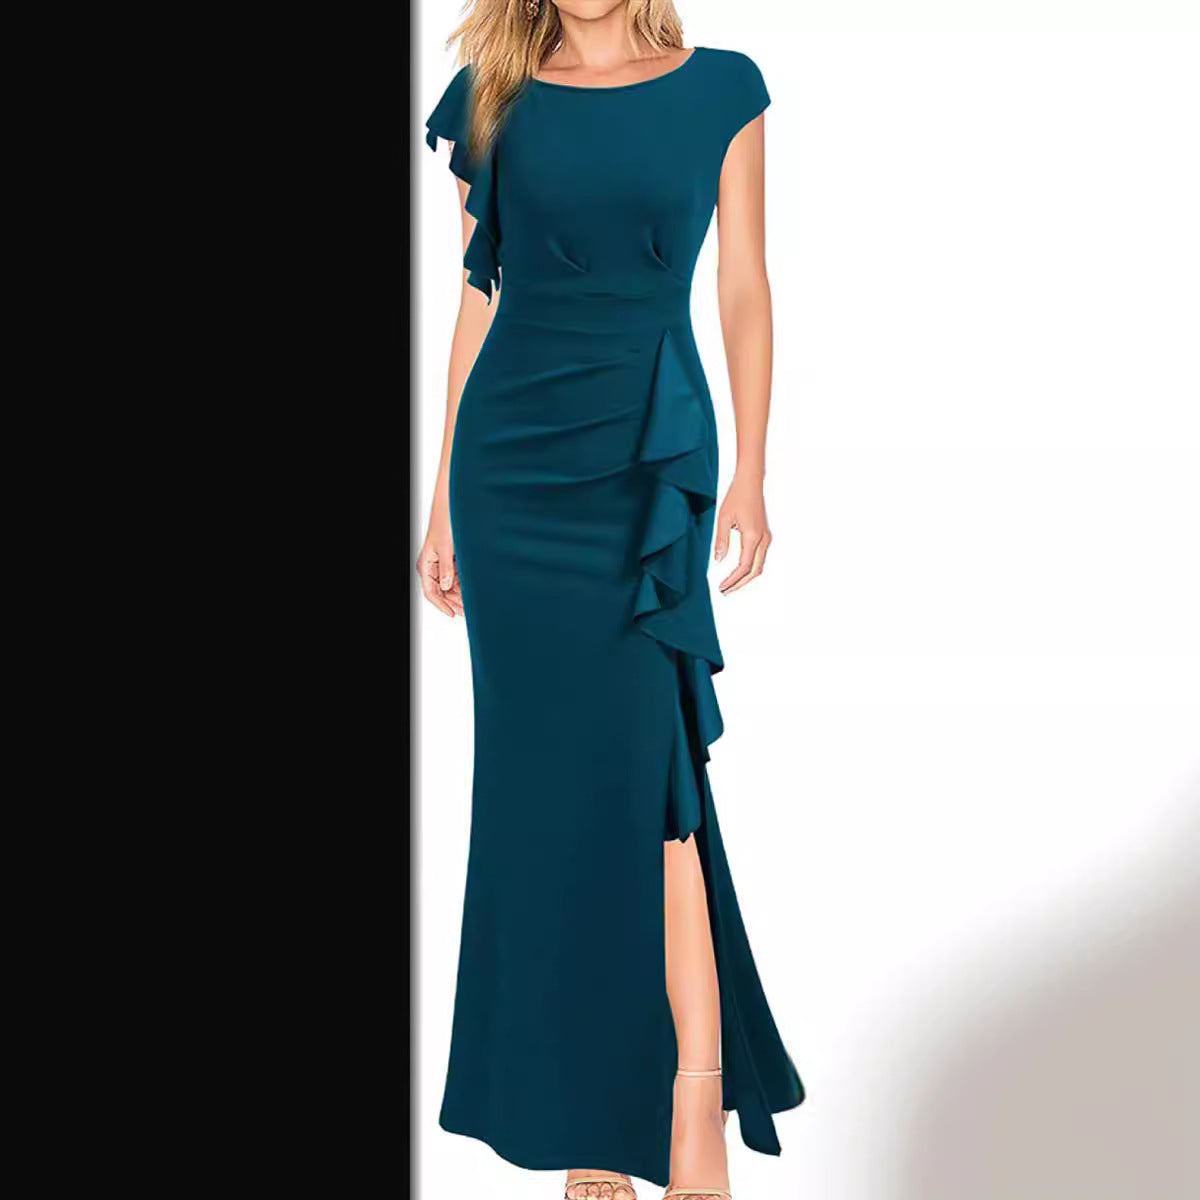 Elegant High Waist Slit Dress, Fashionable Round Neck Commuting Style for Evening Parties